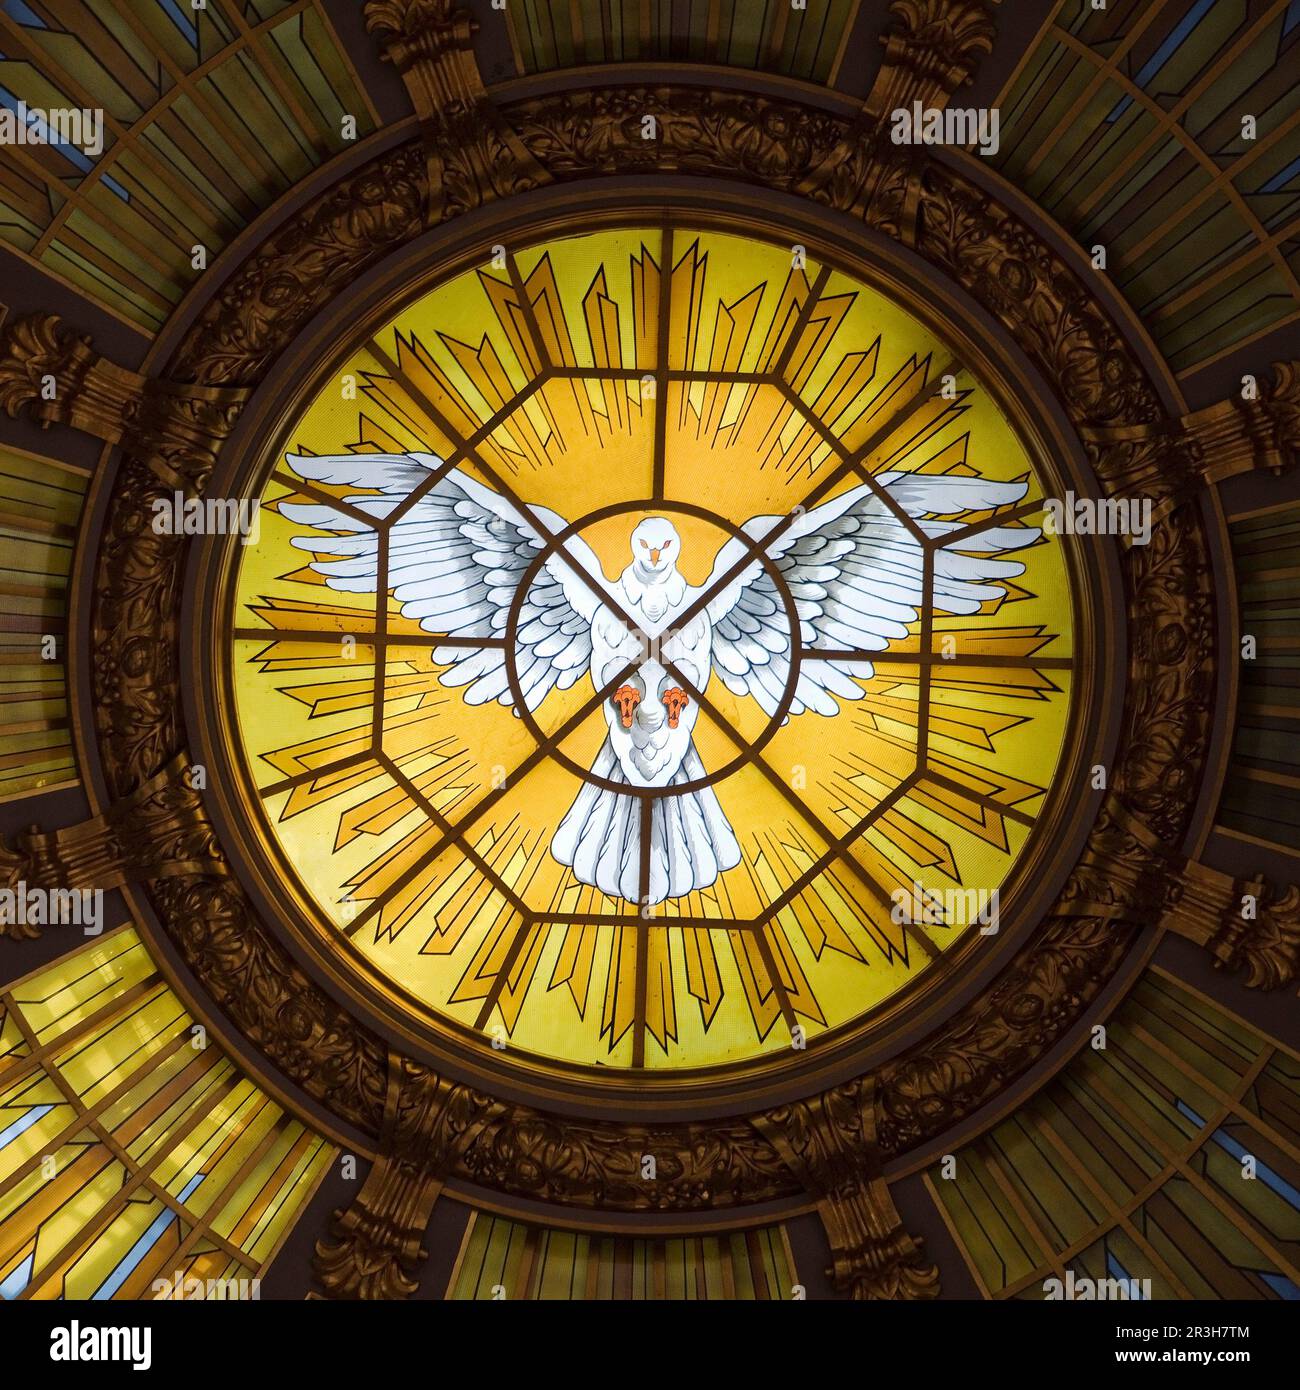 Looking up into the dome with the round, central Holy Spirit window, Berlin Cathedral, Germany Stock Photo